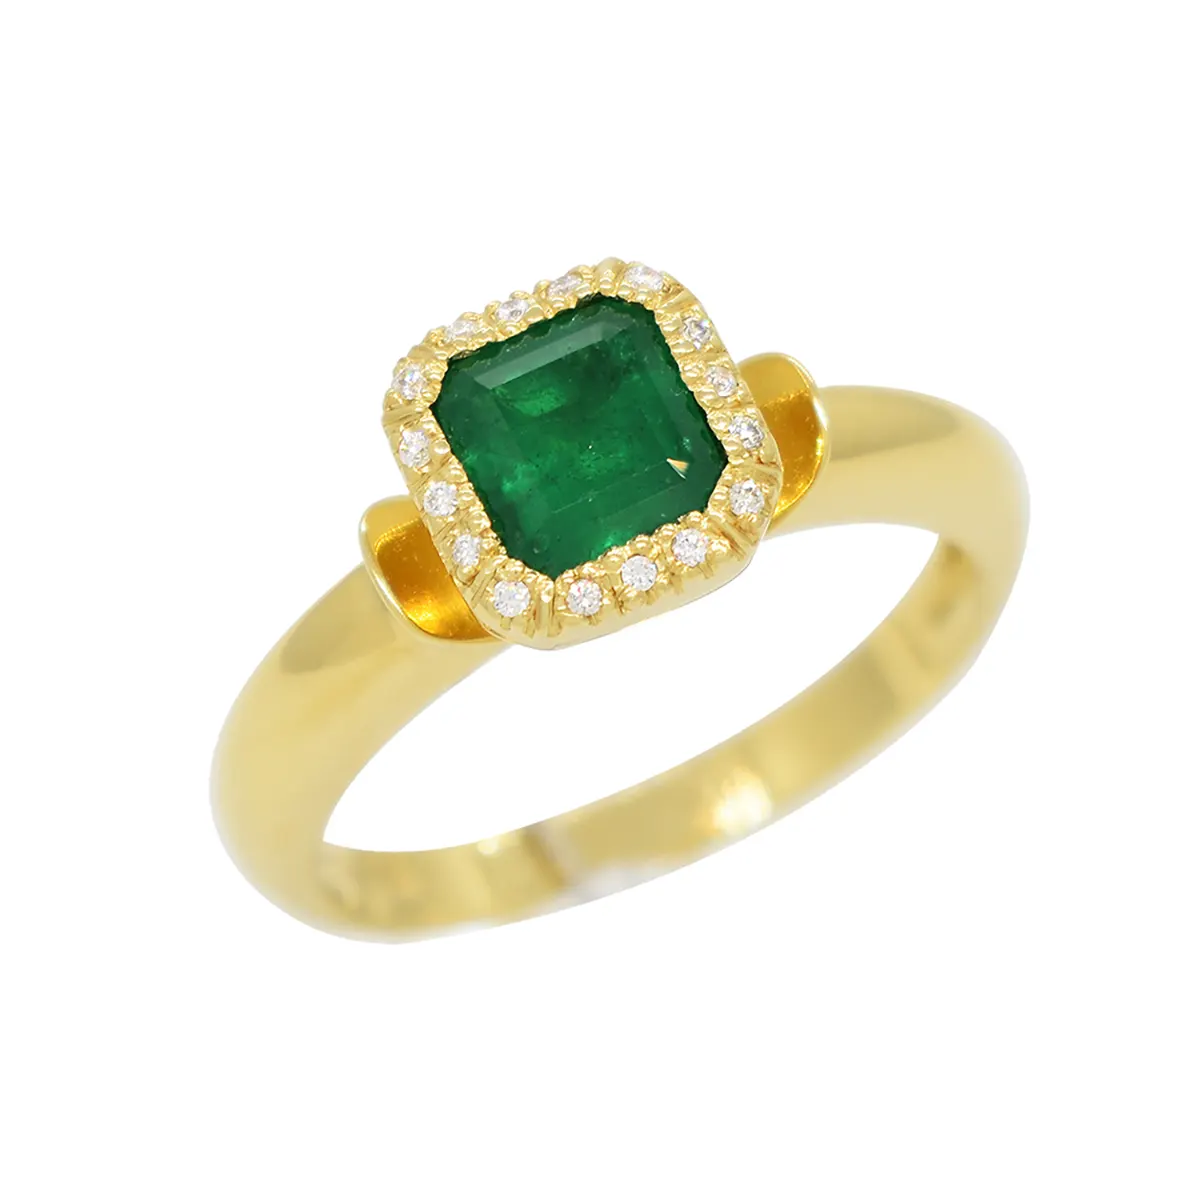 emerald-cut-emerald-in-18k-yellow-gold-ring-with-diamond-halo-in-bezel-setting